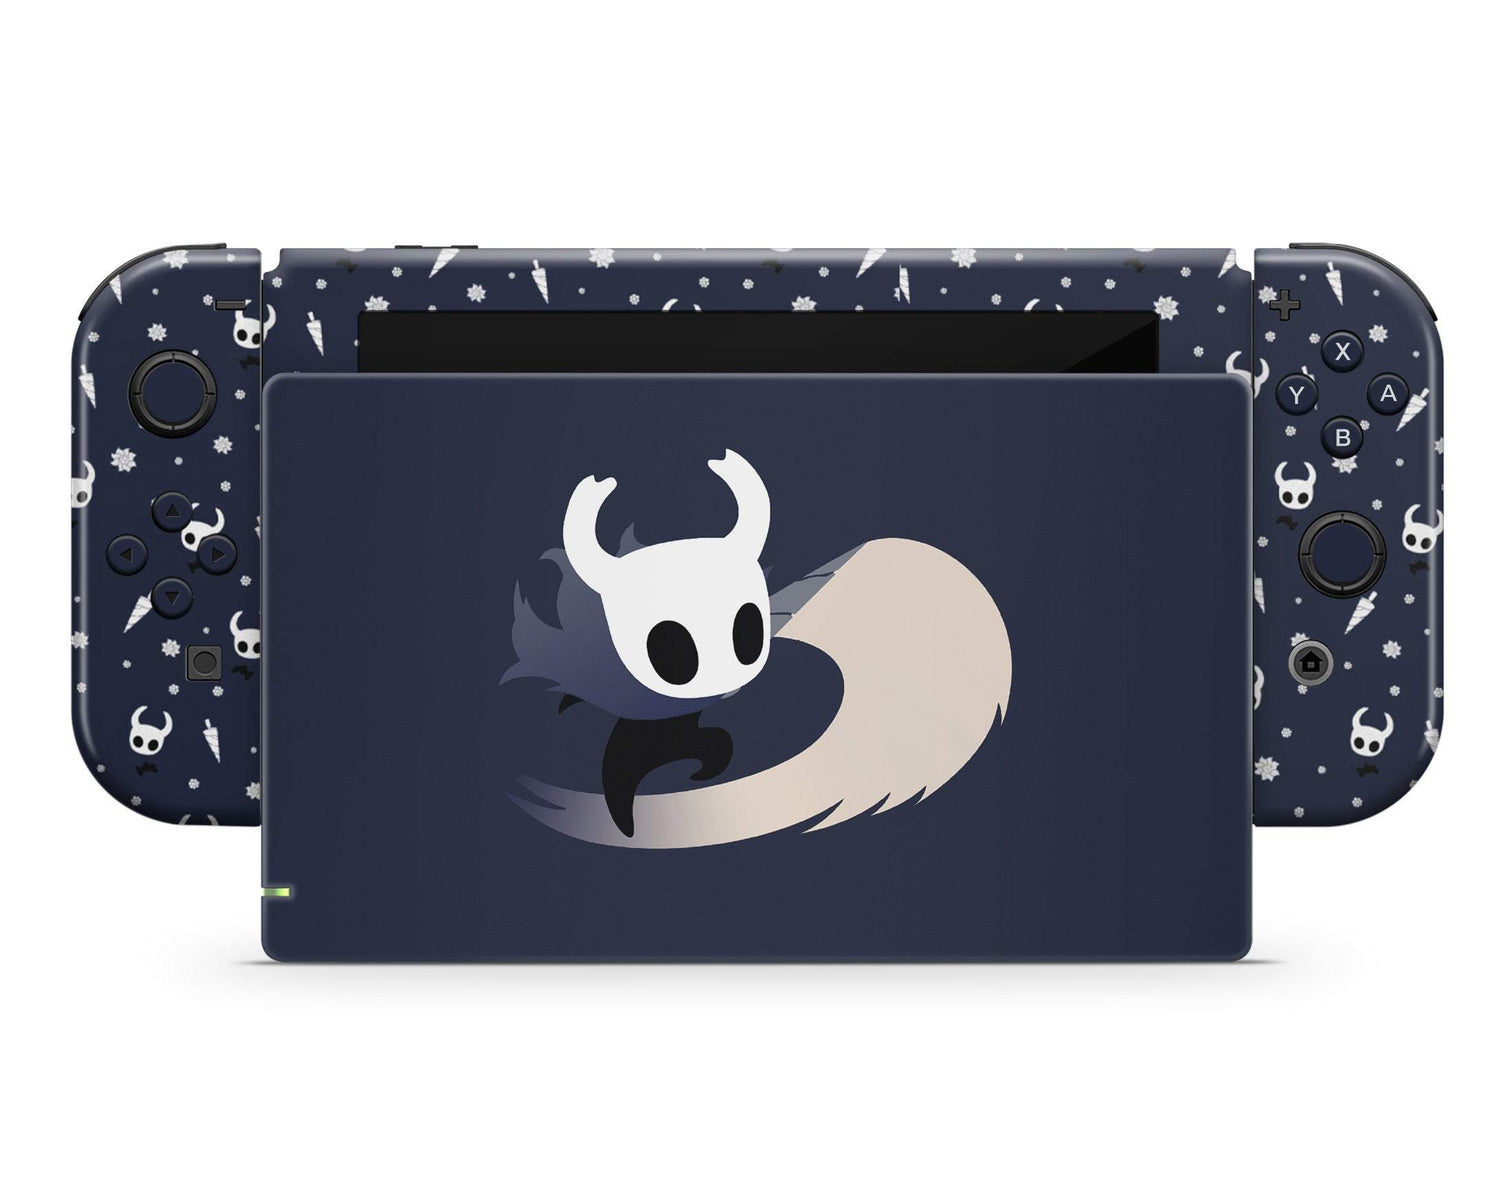 Hollow Knight Nintendo Switch Review - Is It Worth it? 